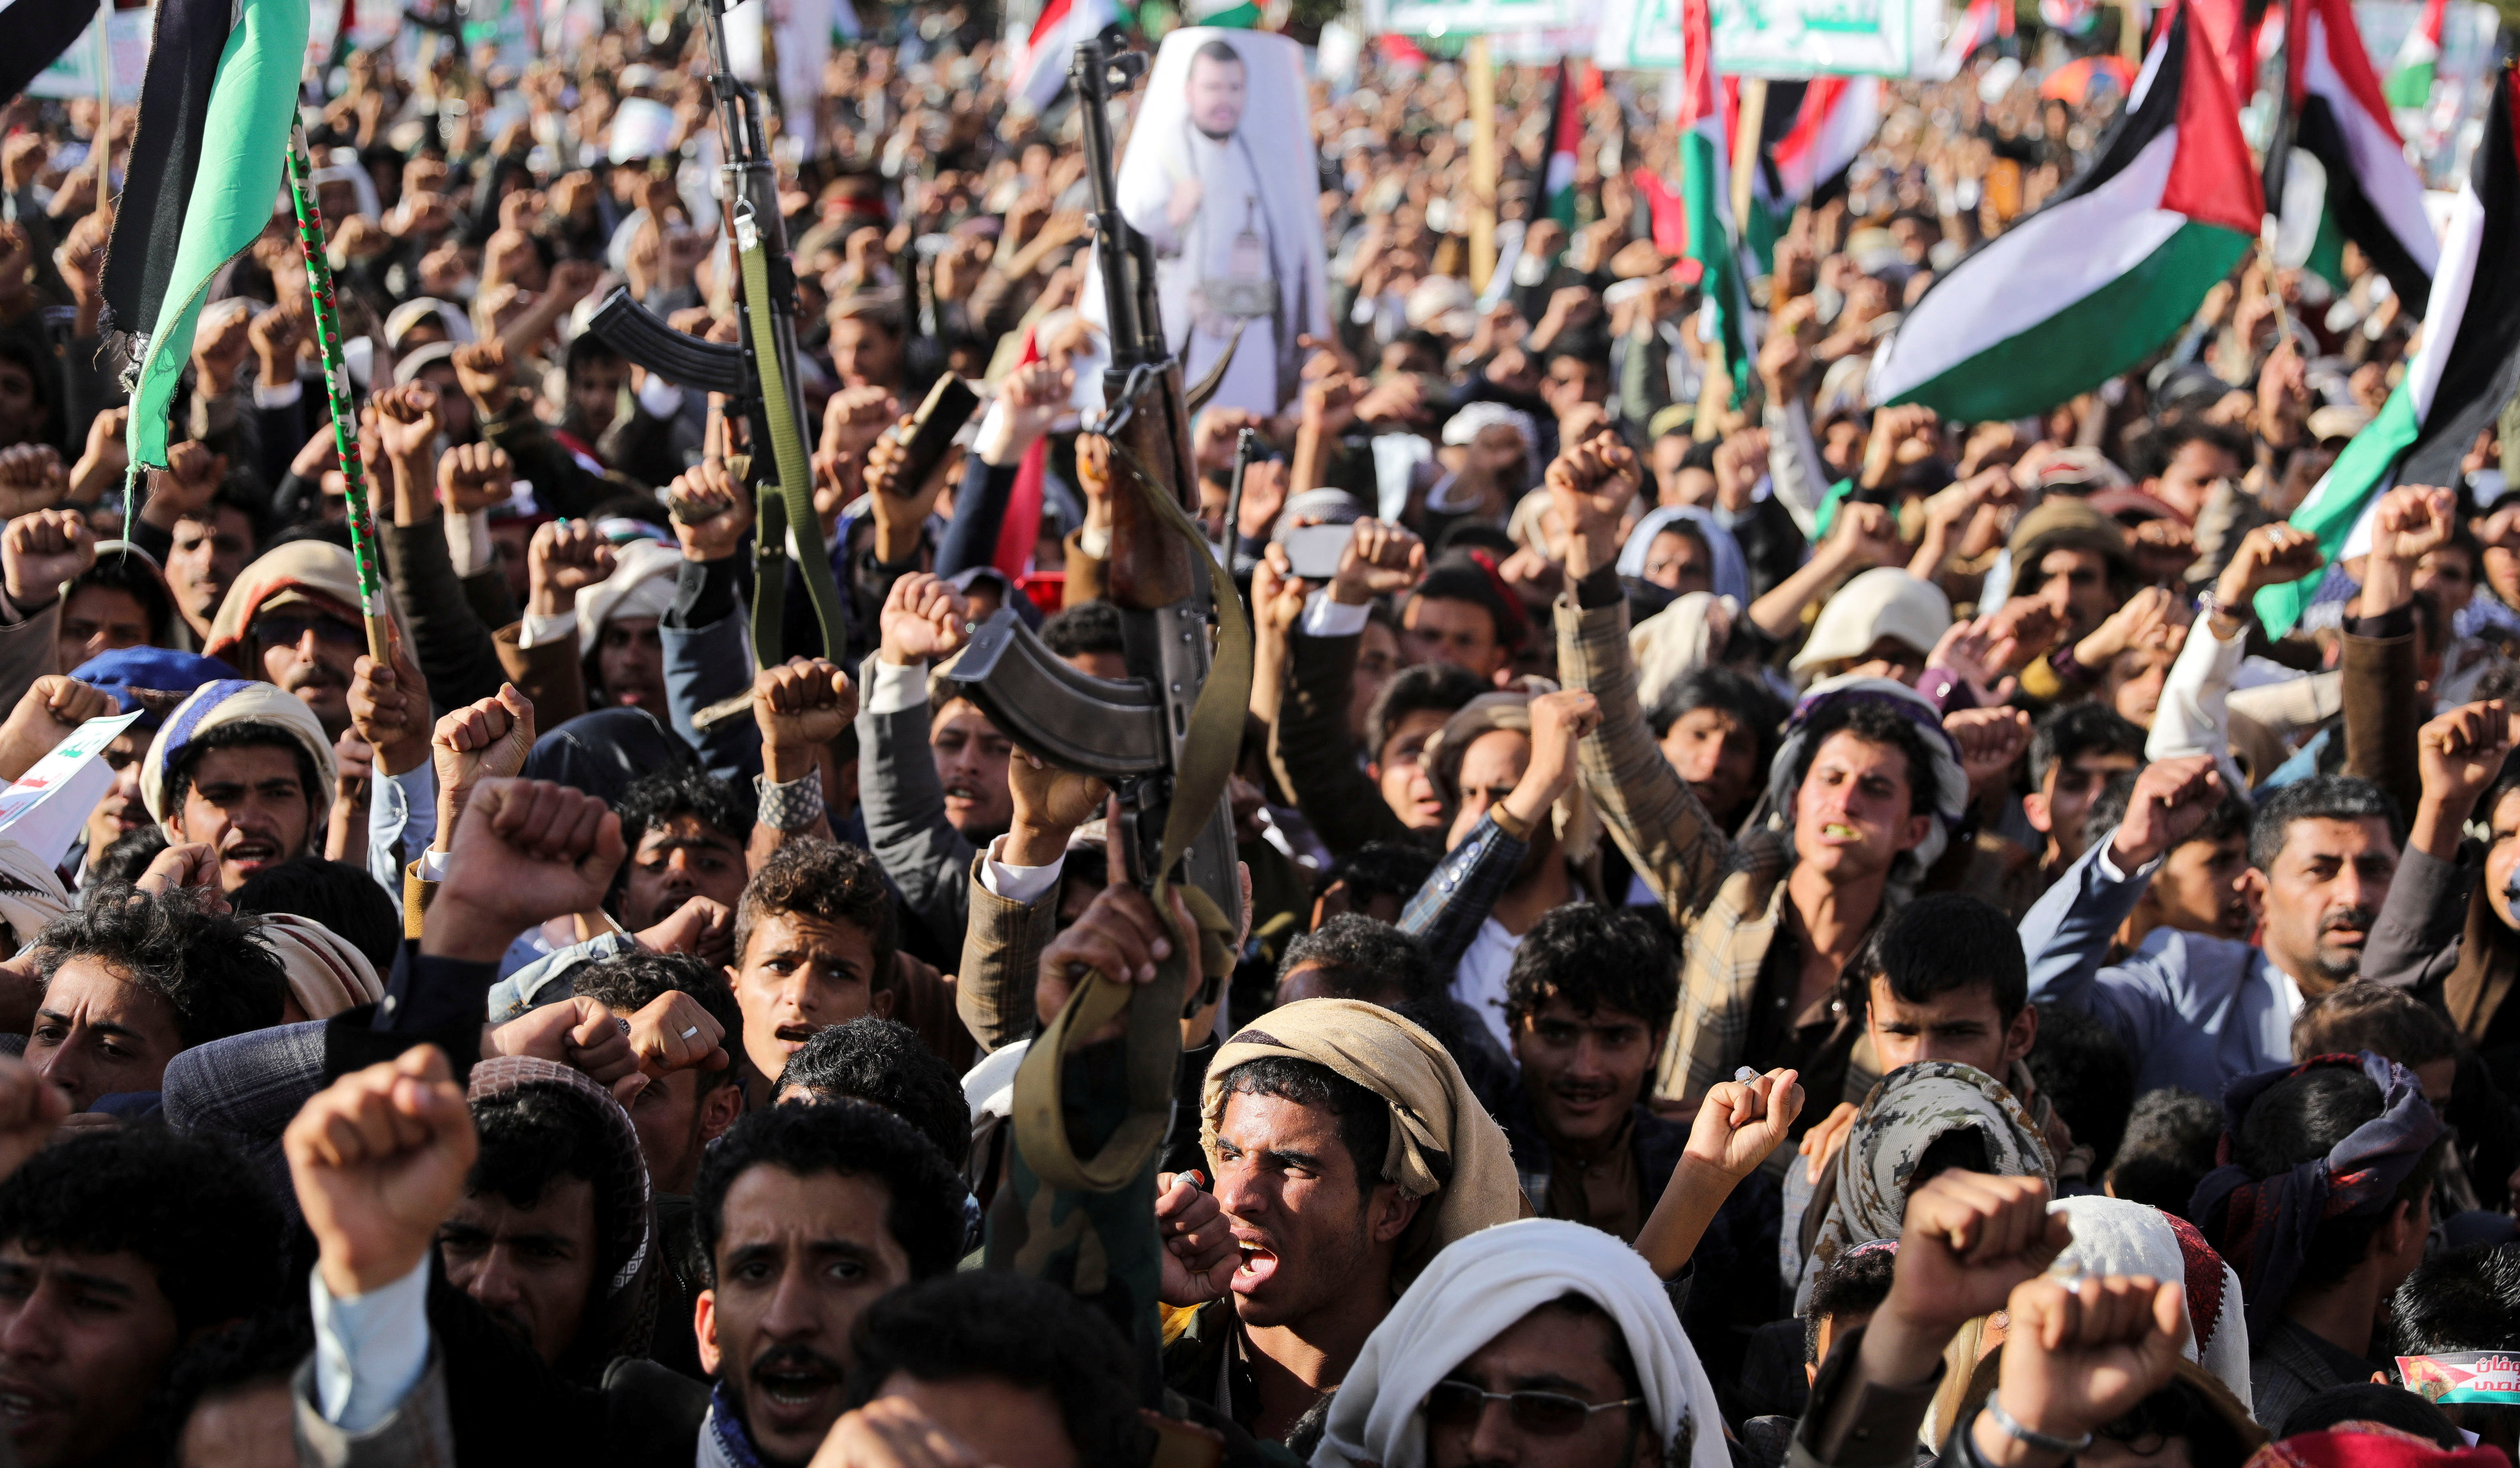 Thousands of Houthi supporters in Yemen rally in solidarity with Palestinians